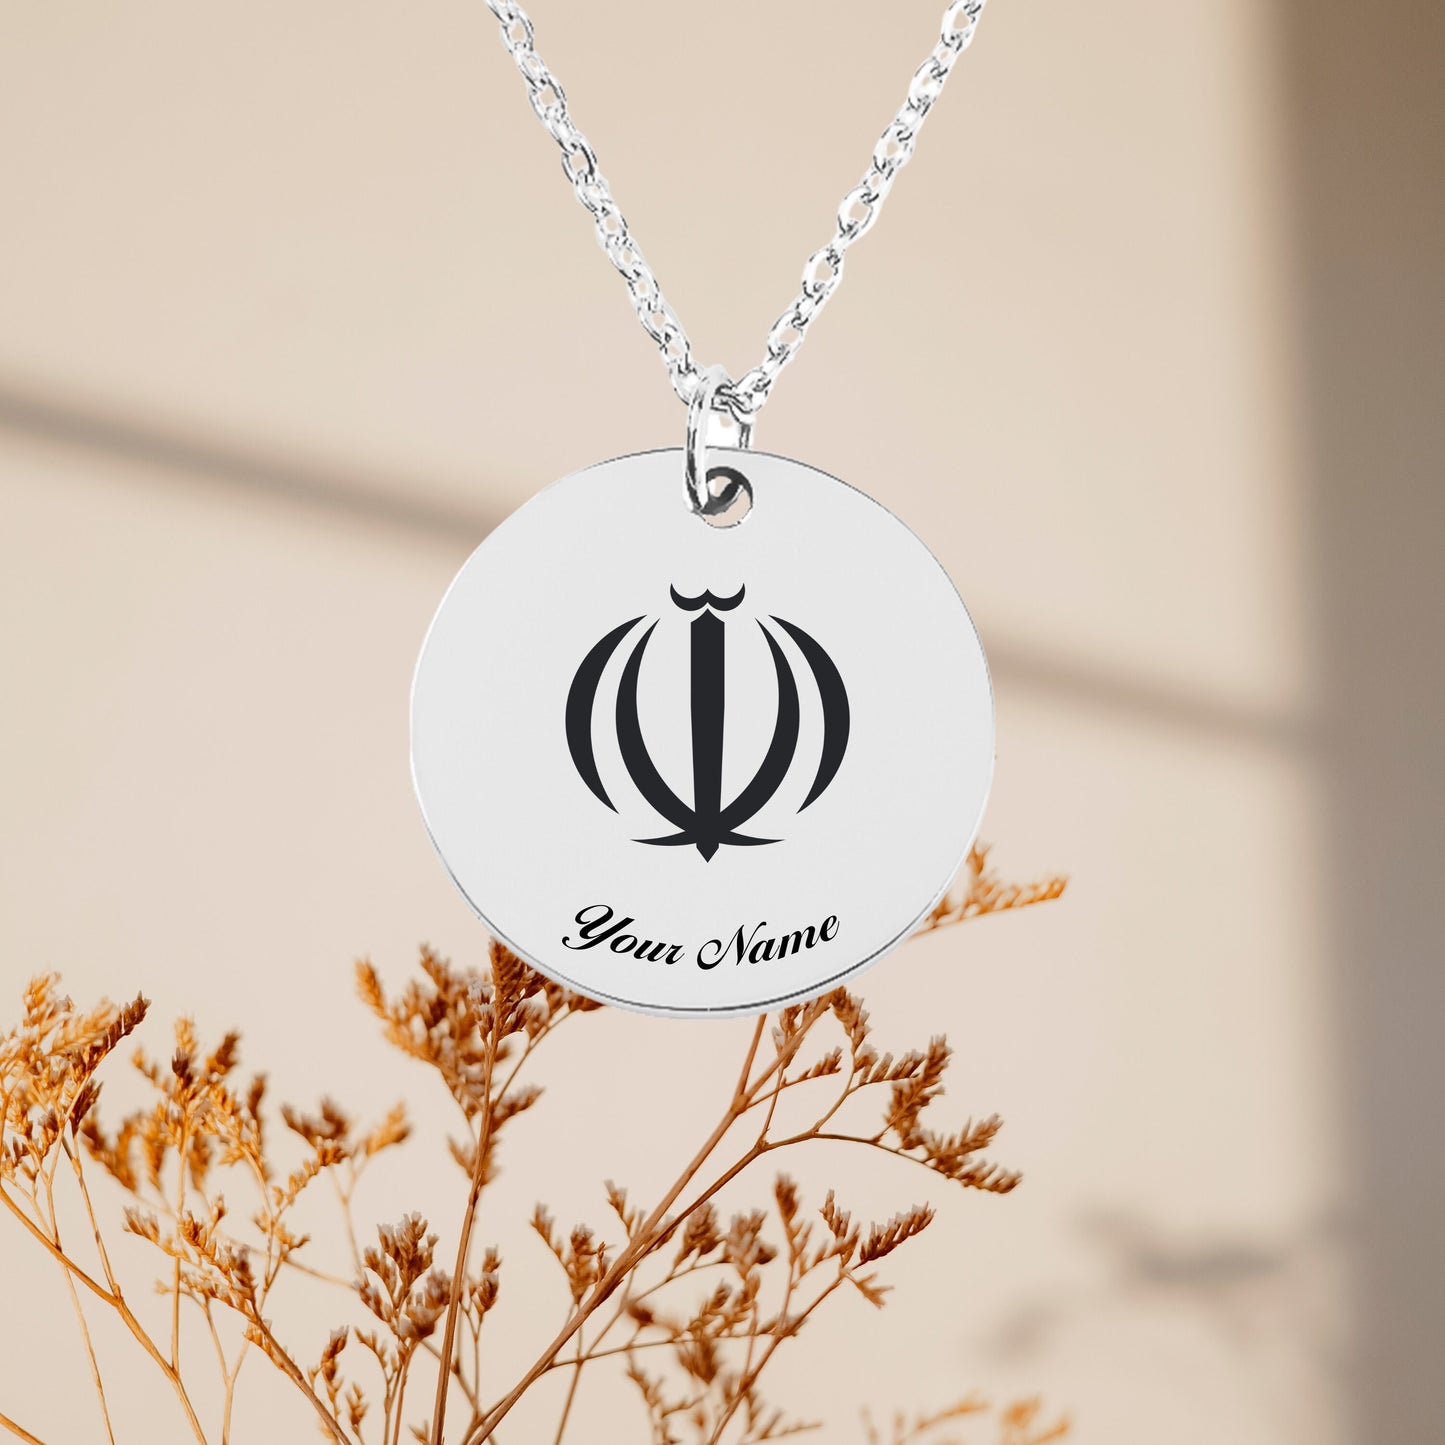 Iran National Emblem Coin Necklace - Personalizable Jewelry